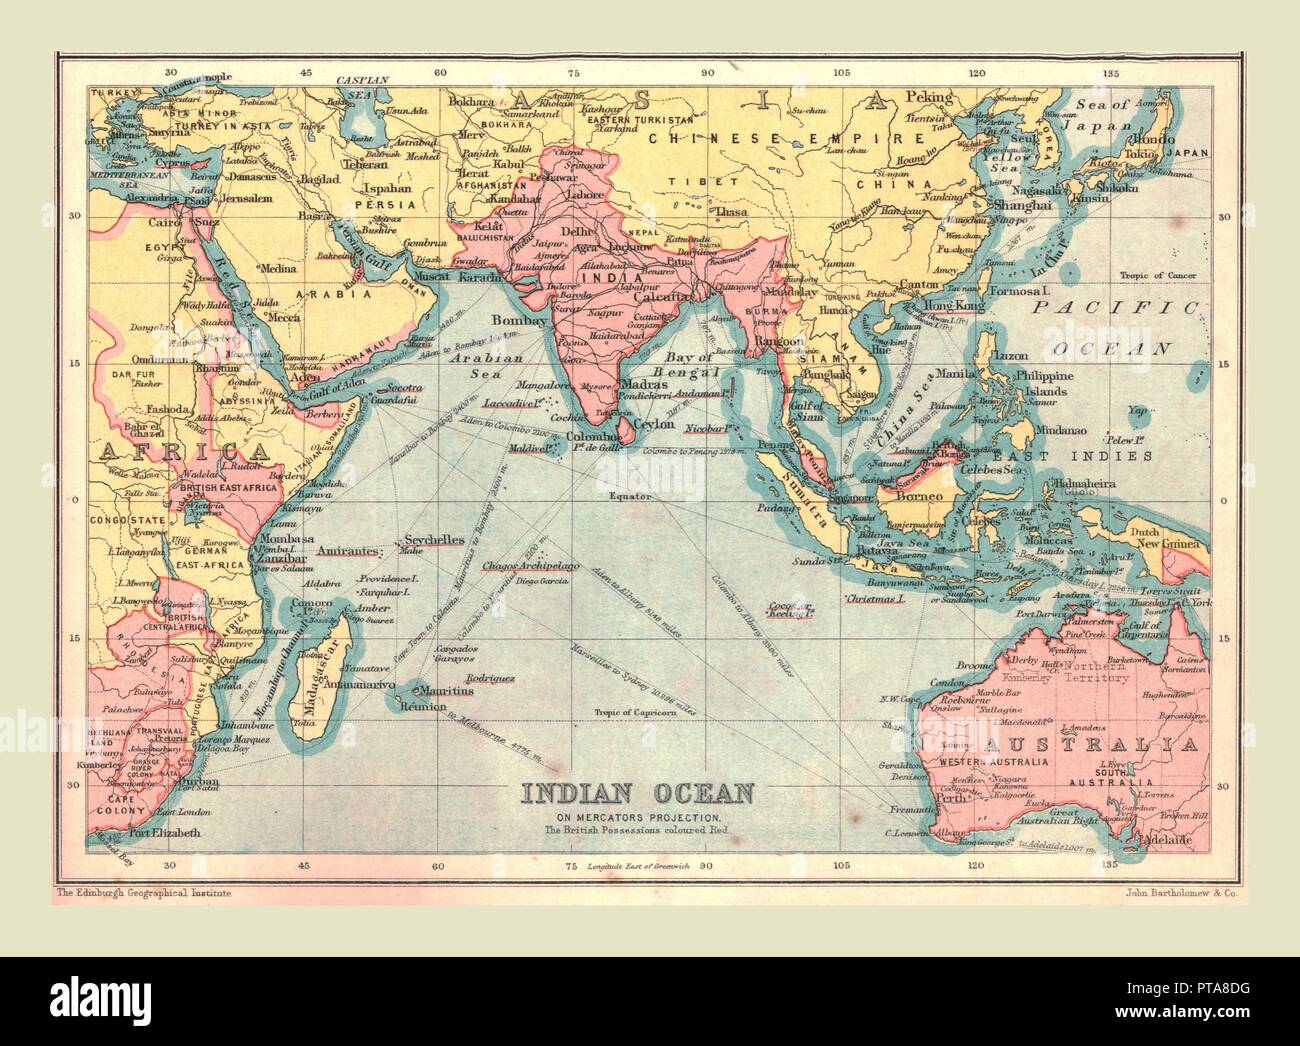 Map Of The Indian Ocean 1902 Showing The Coast Of East Africa Arabia The Indian Subcontinent The Far East And Part Of Australia From The Century Atlas Of The World John Walker Amp Co Ltd London 1902 PTA8DG 